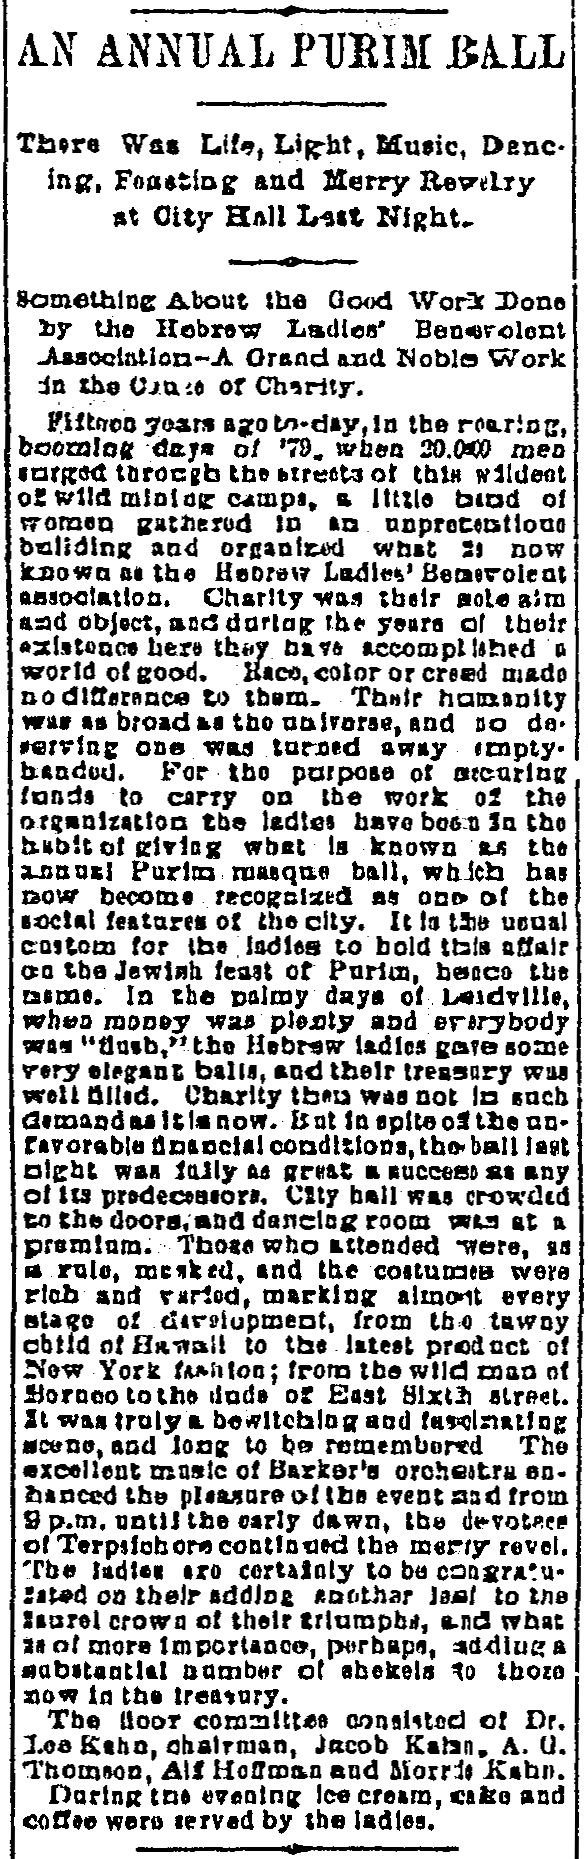 Leadville Evening Chronicle. Wednesday, March 21, 1894.